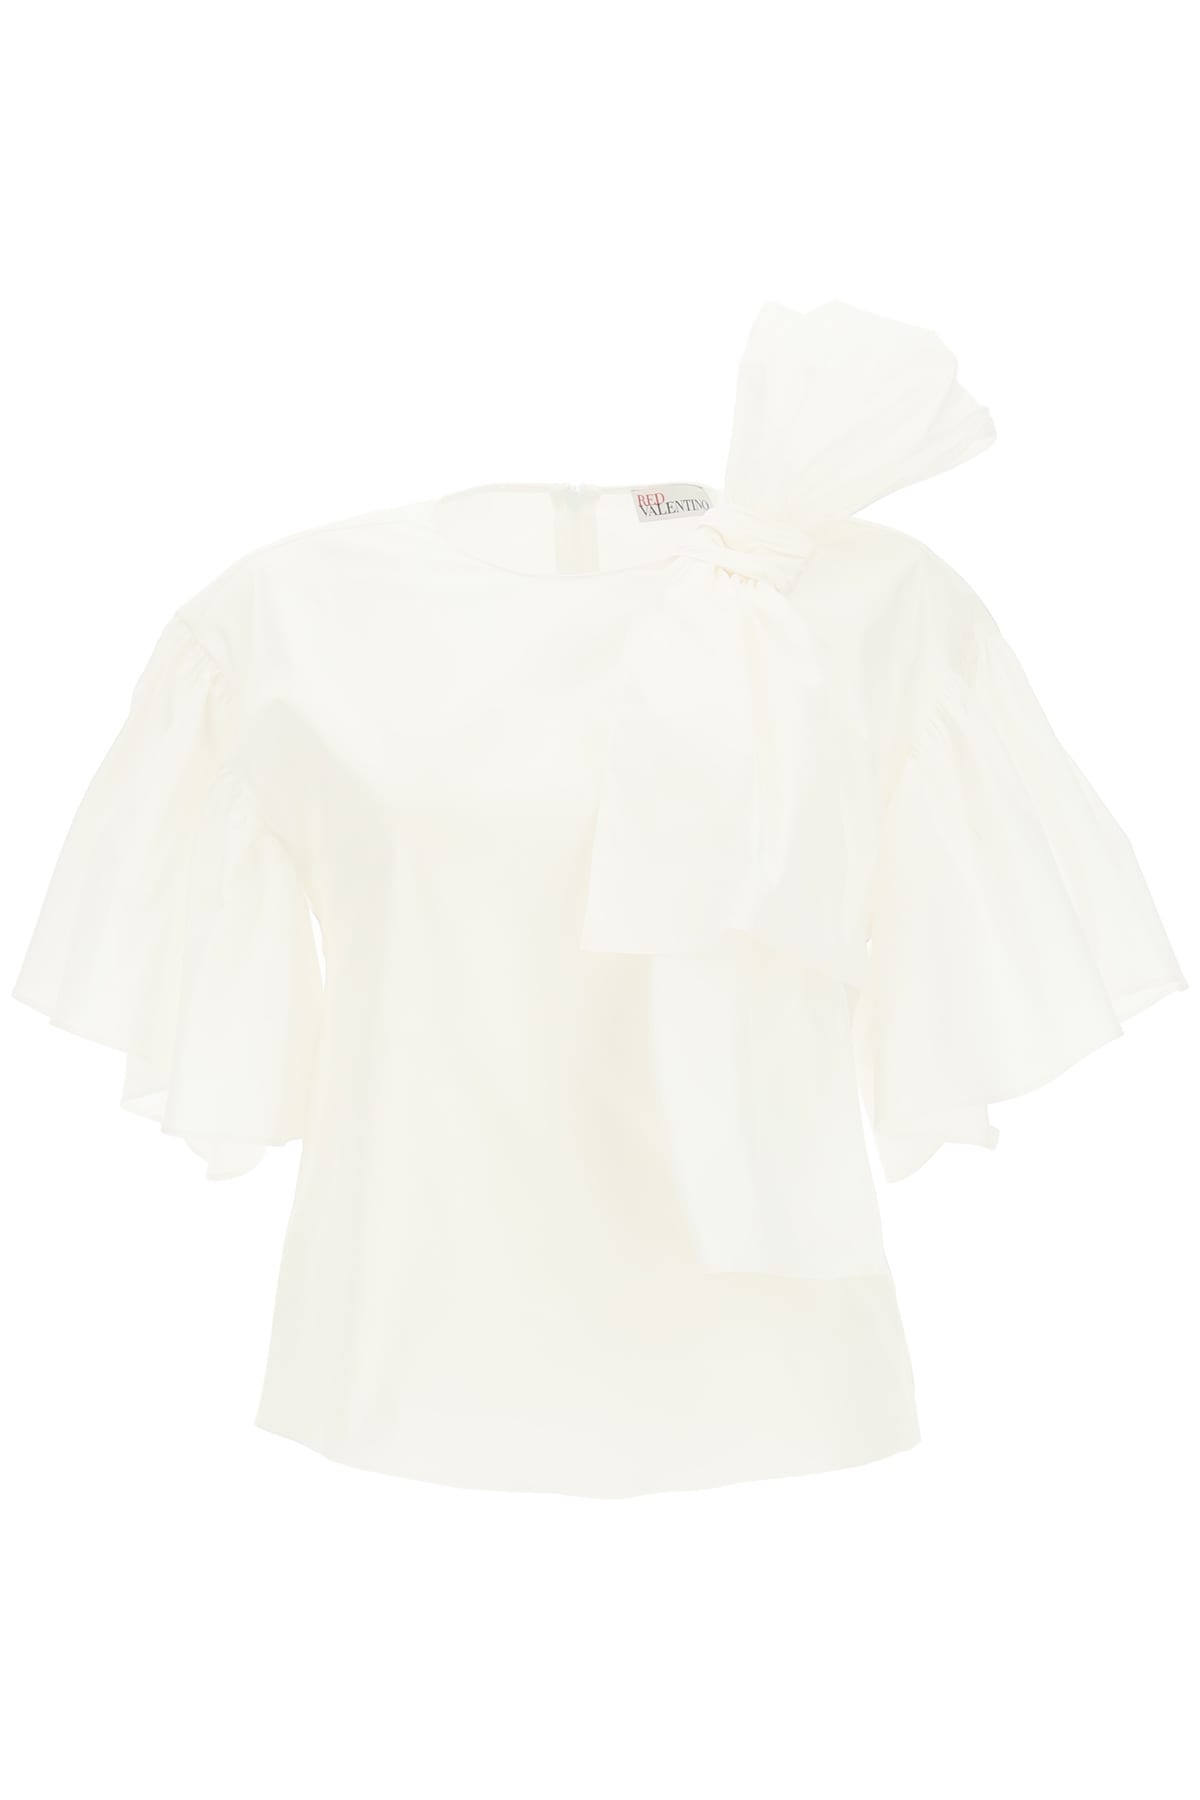 RED Valentino Blouse With Ruffles